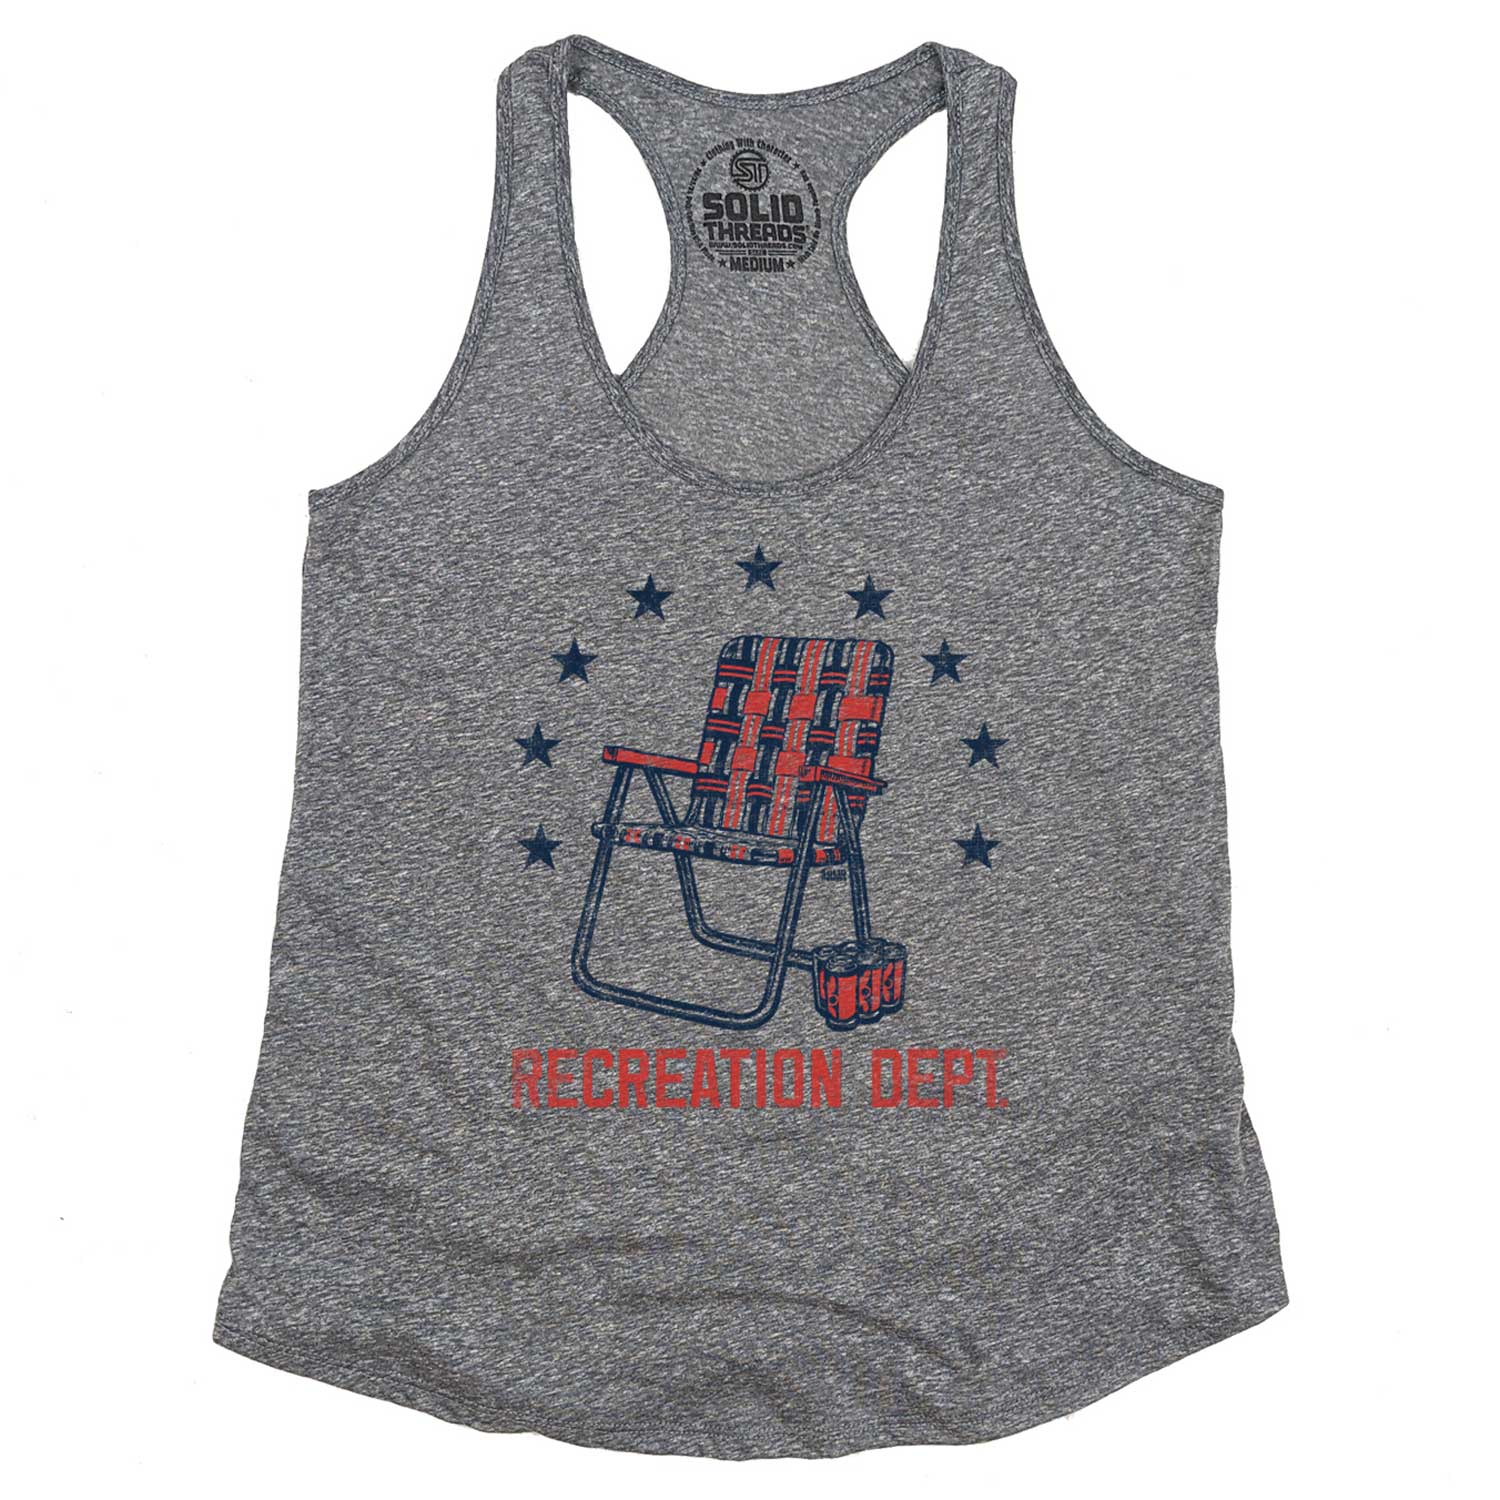 Women's Recreation Department Vintage Graphic Tank Top | Funny Drinking T-Shirt | Solid Threads